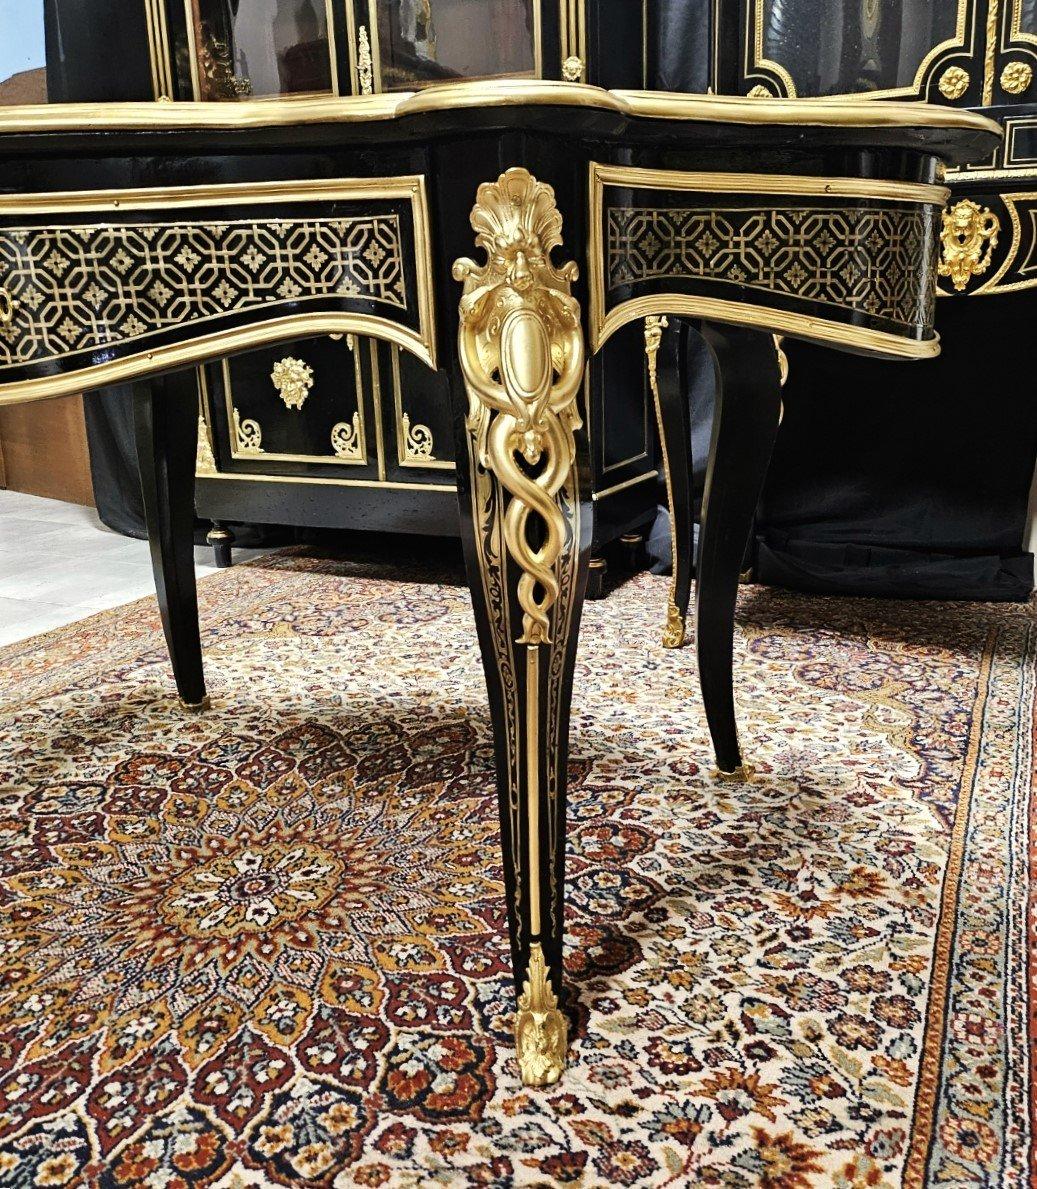 Diehl Black French Table Napoleon III Boulle Brass Gilt Bronze 19th Century For Sale 2